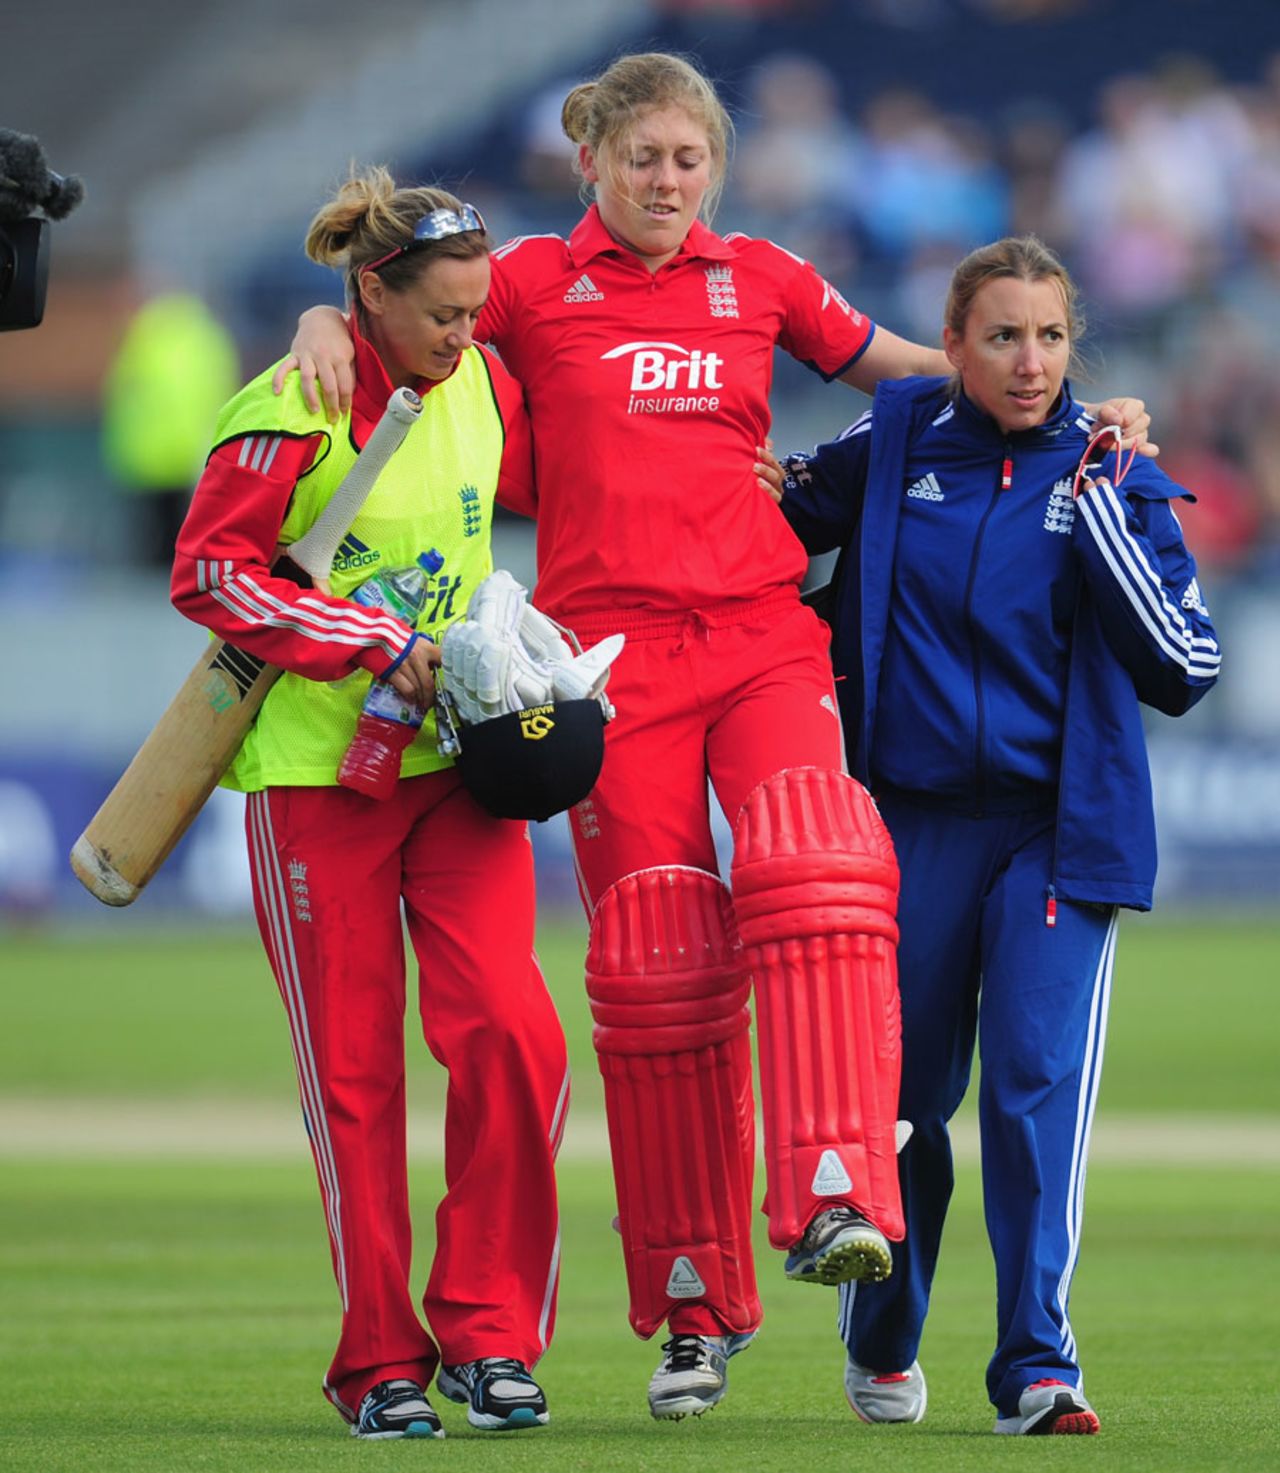 Heather Knight was helped off the field after she suffered an injury during her dismissal, England v Australia, 3rd Women's T20I, Chester-le-Street, August 31, 2013